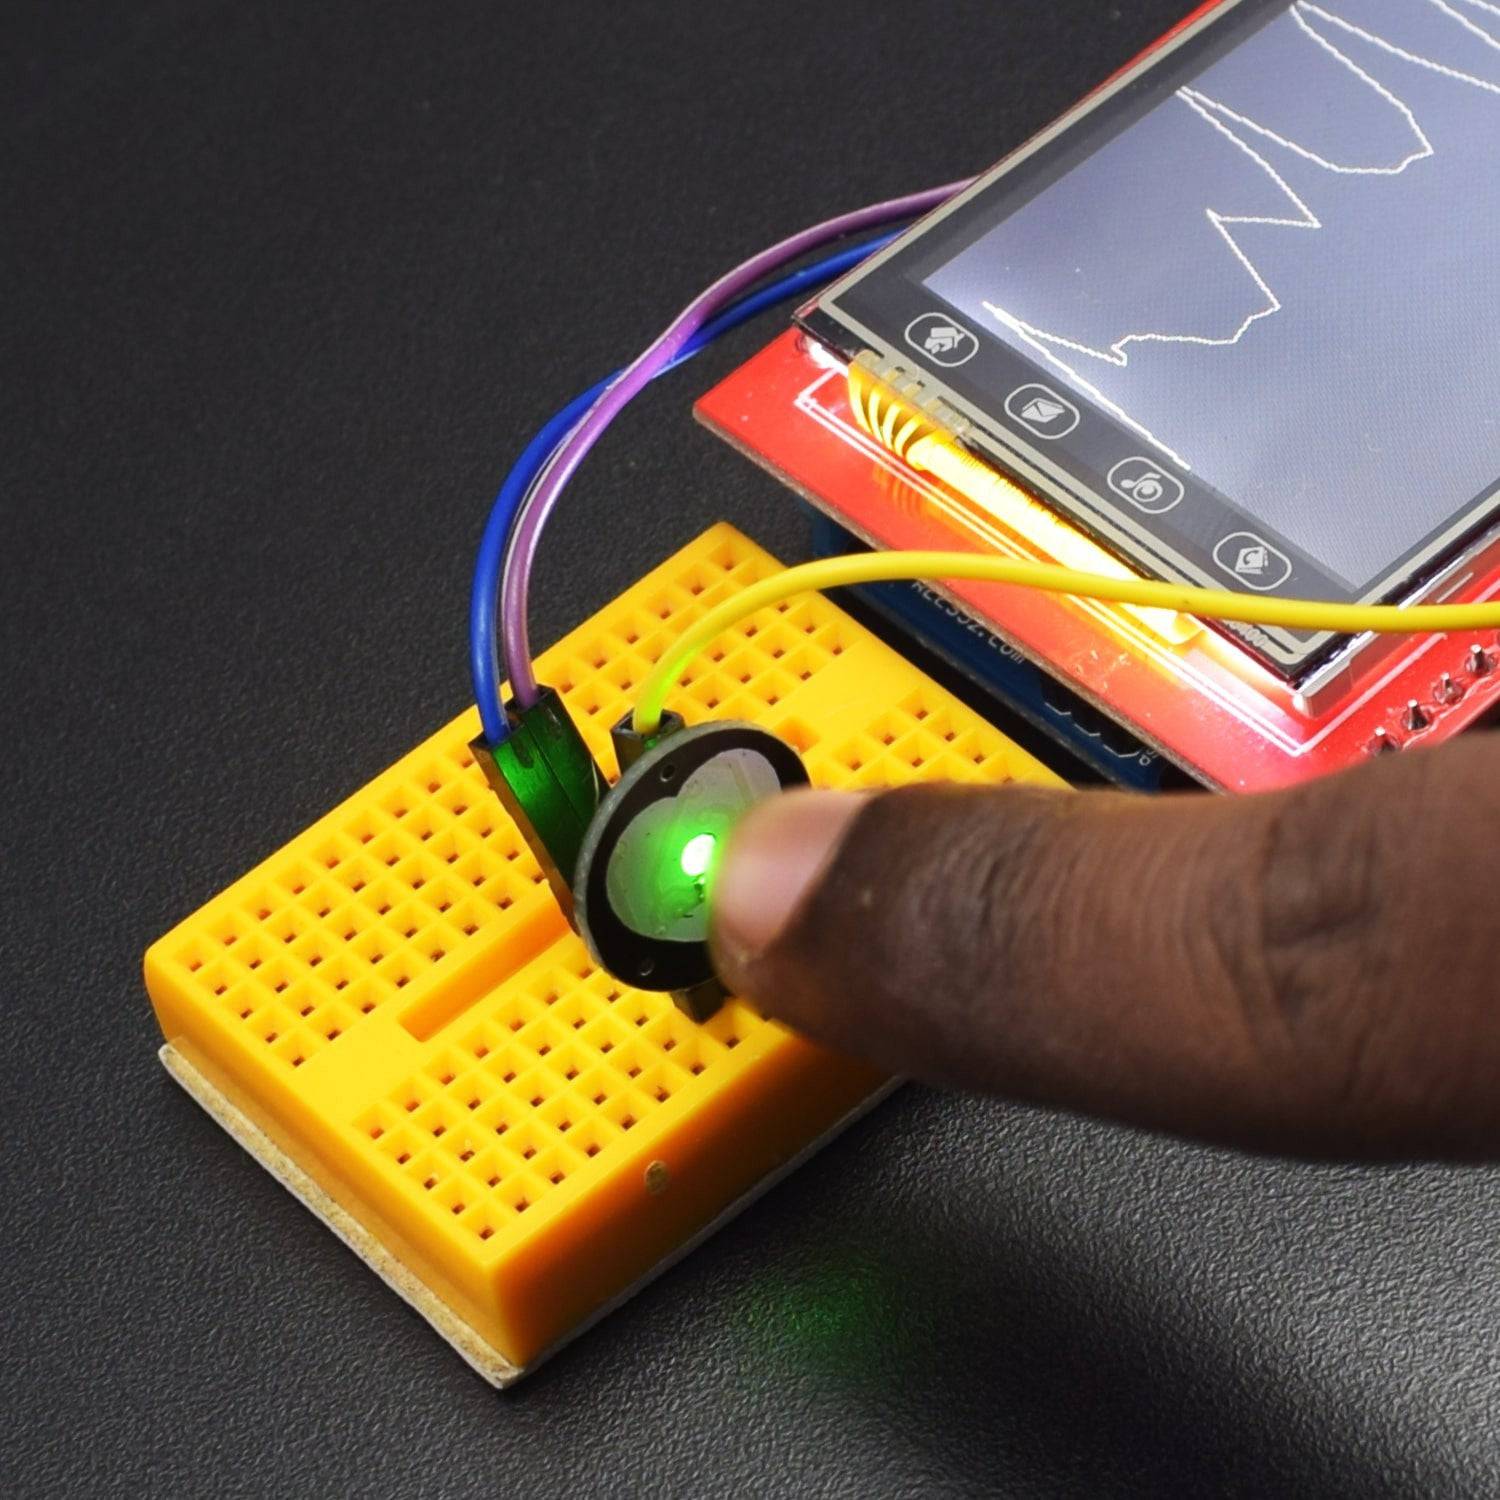 Make a Heartbeat monitor with 2.4 inch TFT display using pulse rate sensor - KT585 - REES52